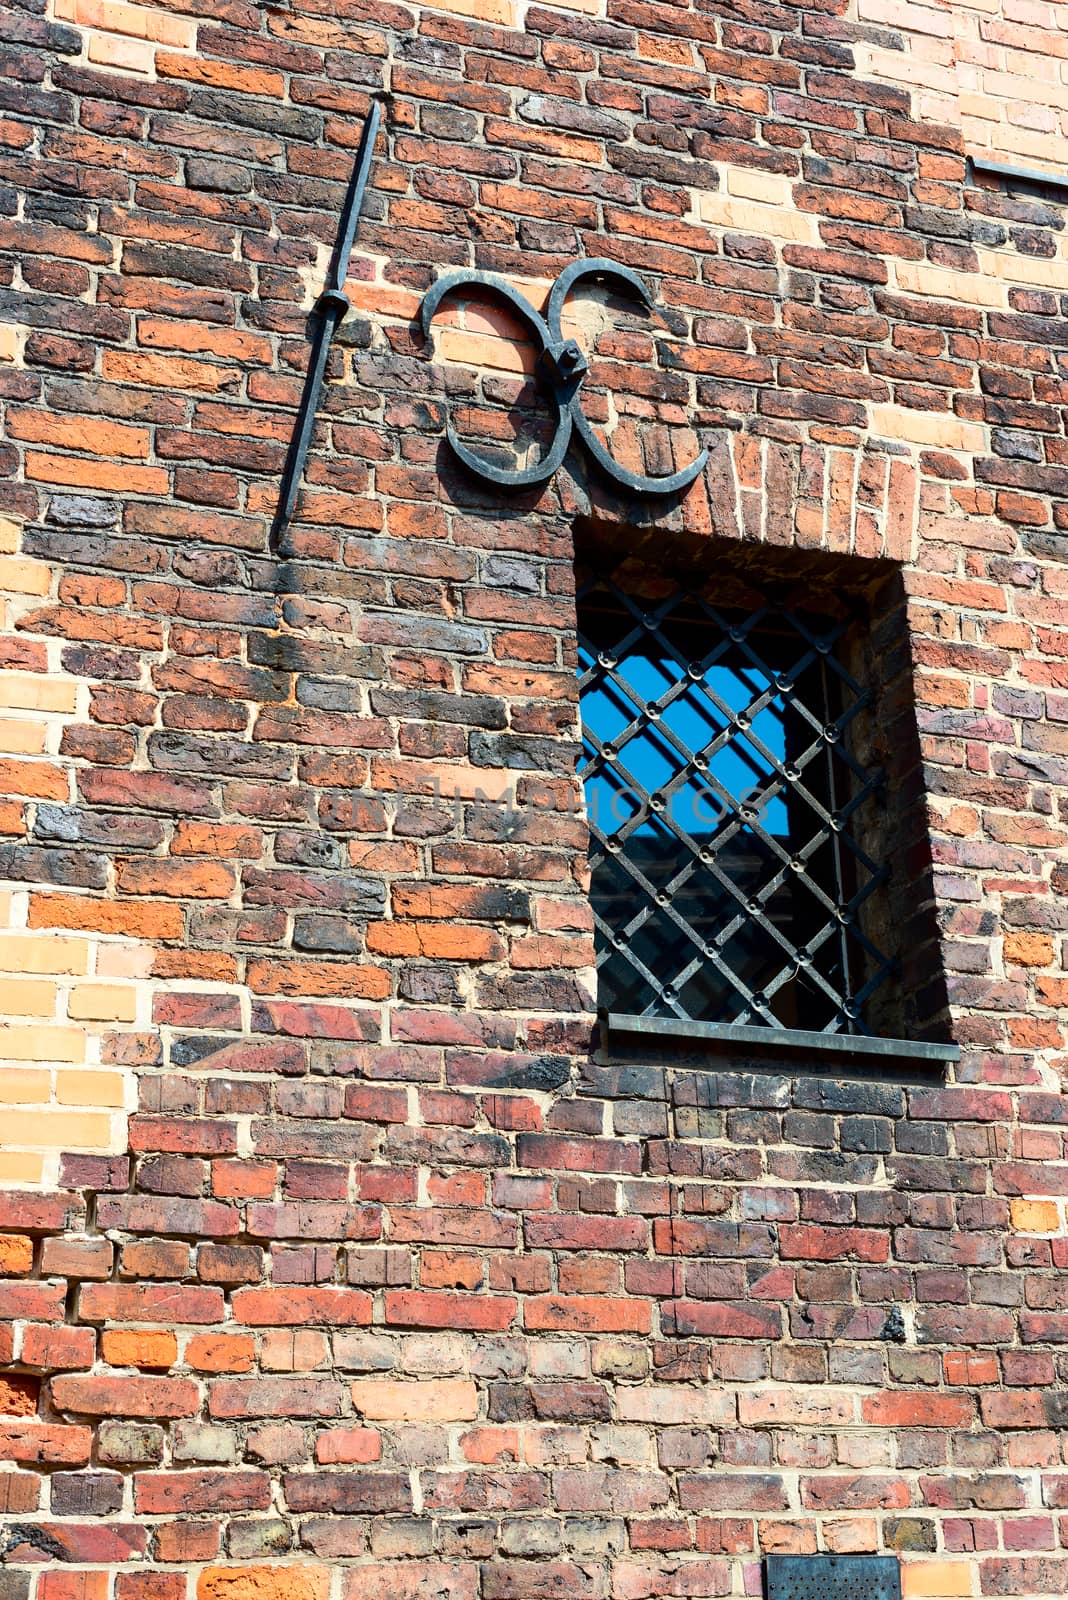 Small barred window in an old brick wall. The metal bars of the window in the form of an arch